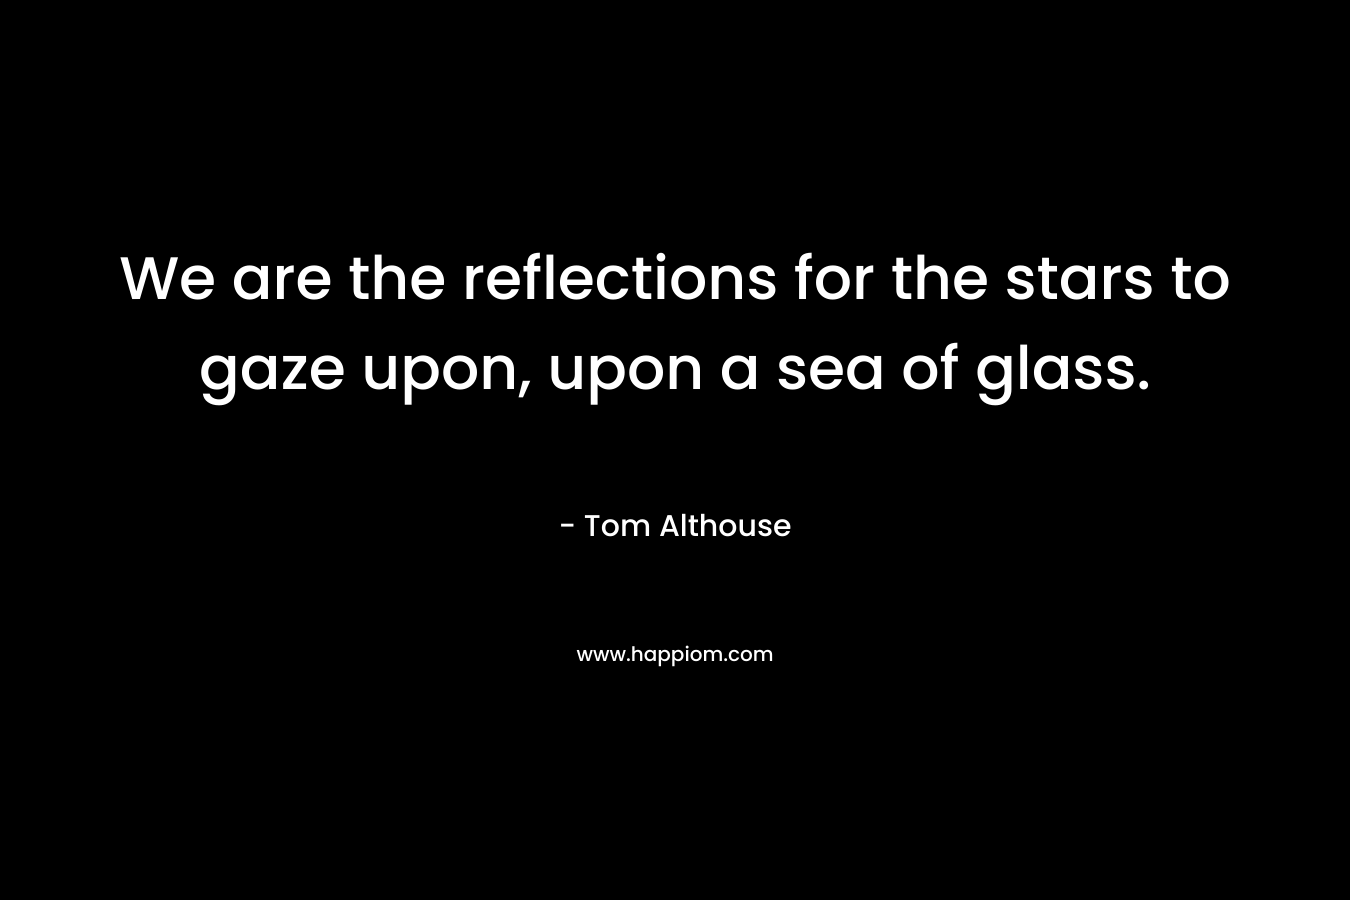 We are the reflections for the stars to gaze upon, upon a sea of glass. – Tom Althouse